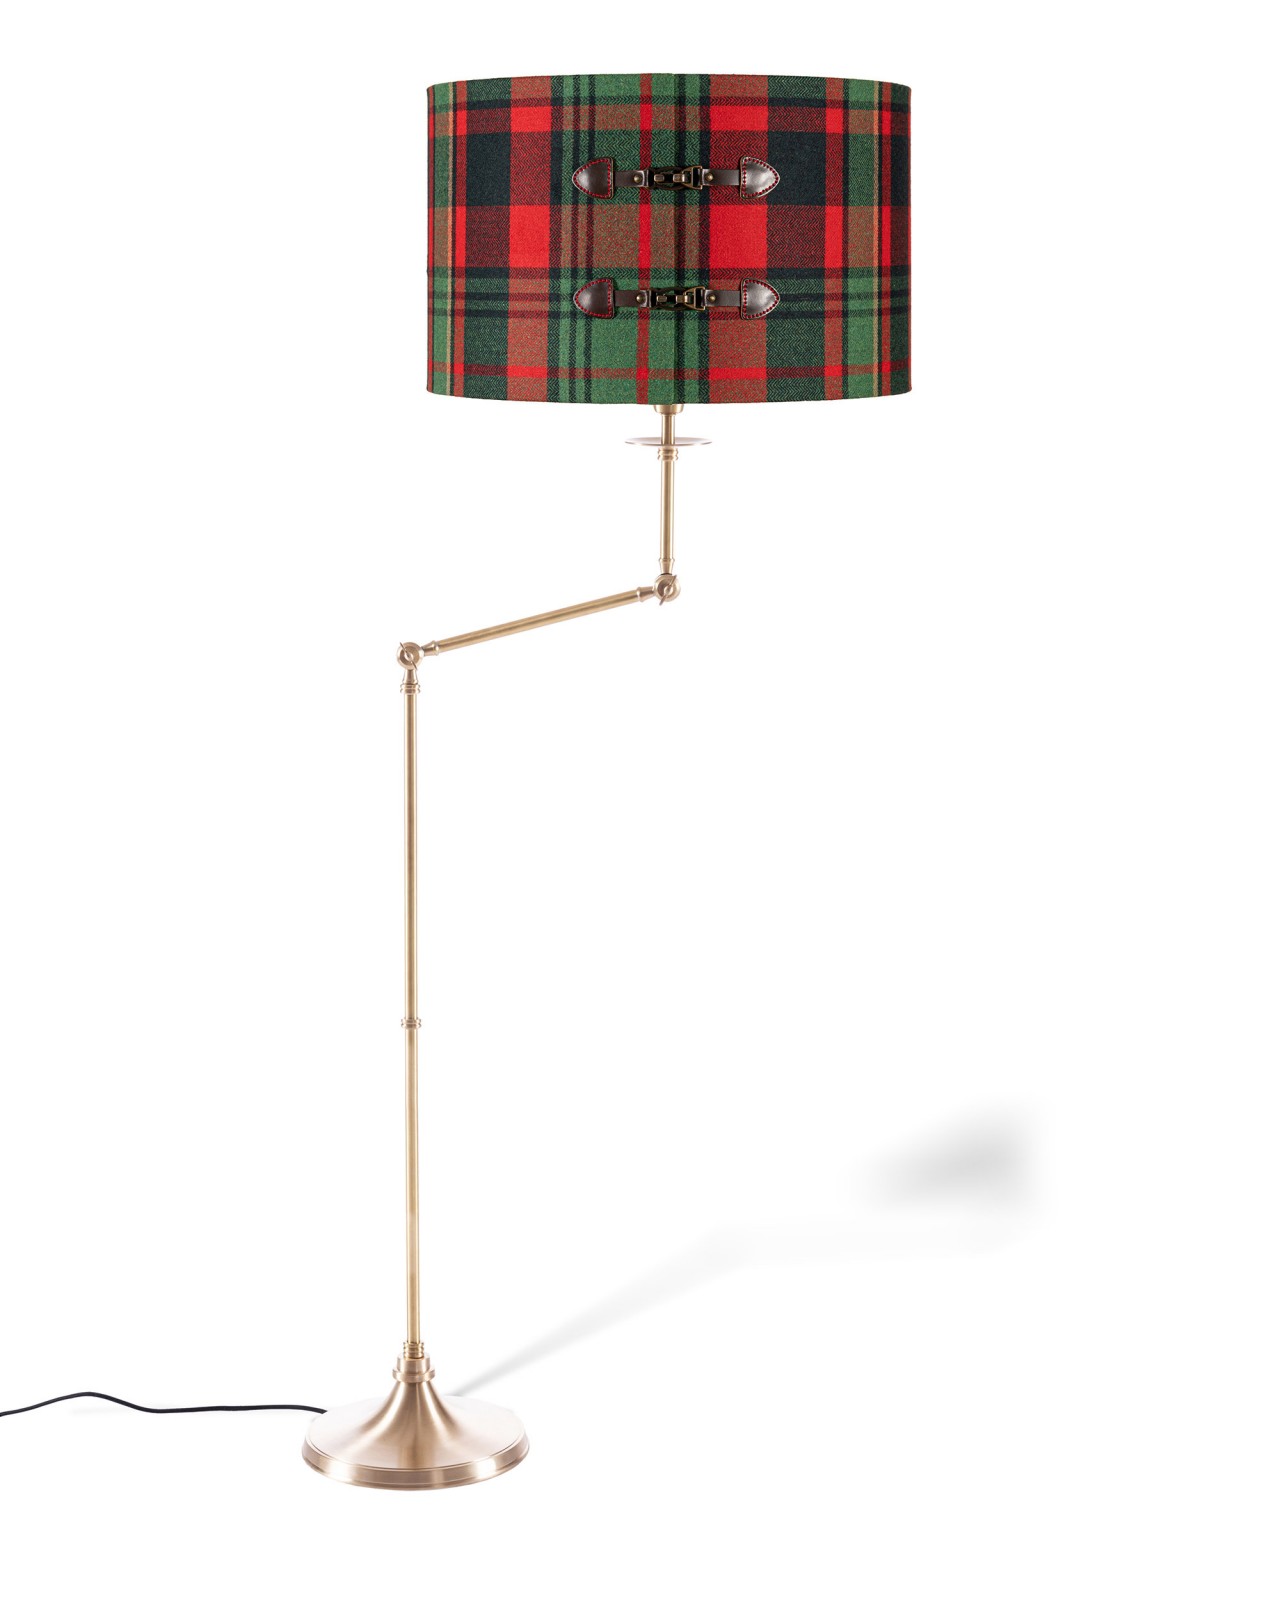 TYROLEAN PLAID Wool Leather Buckles Lampshade